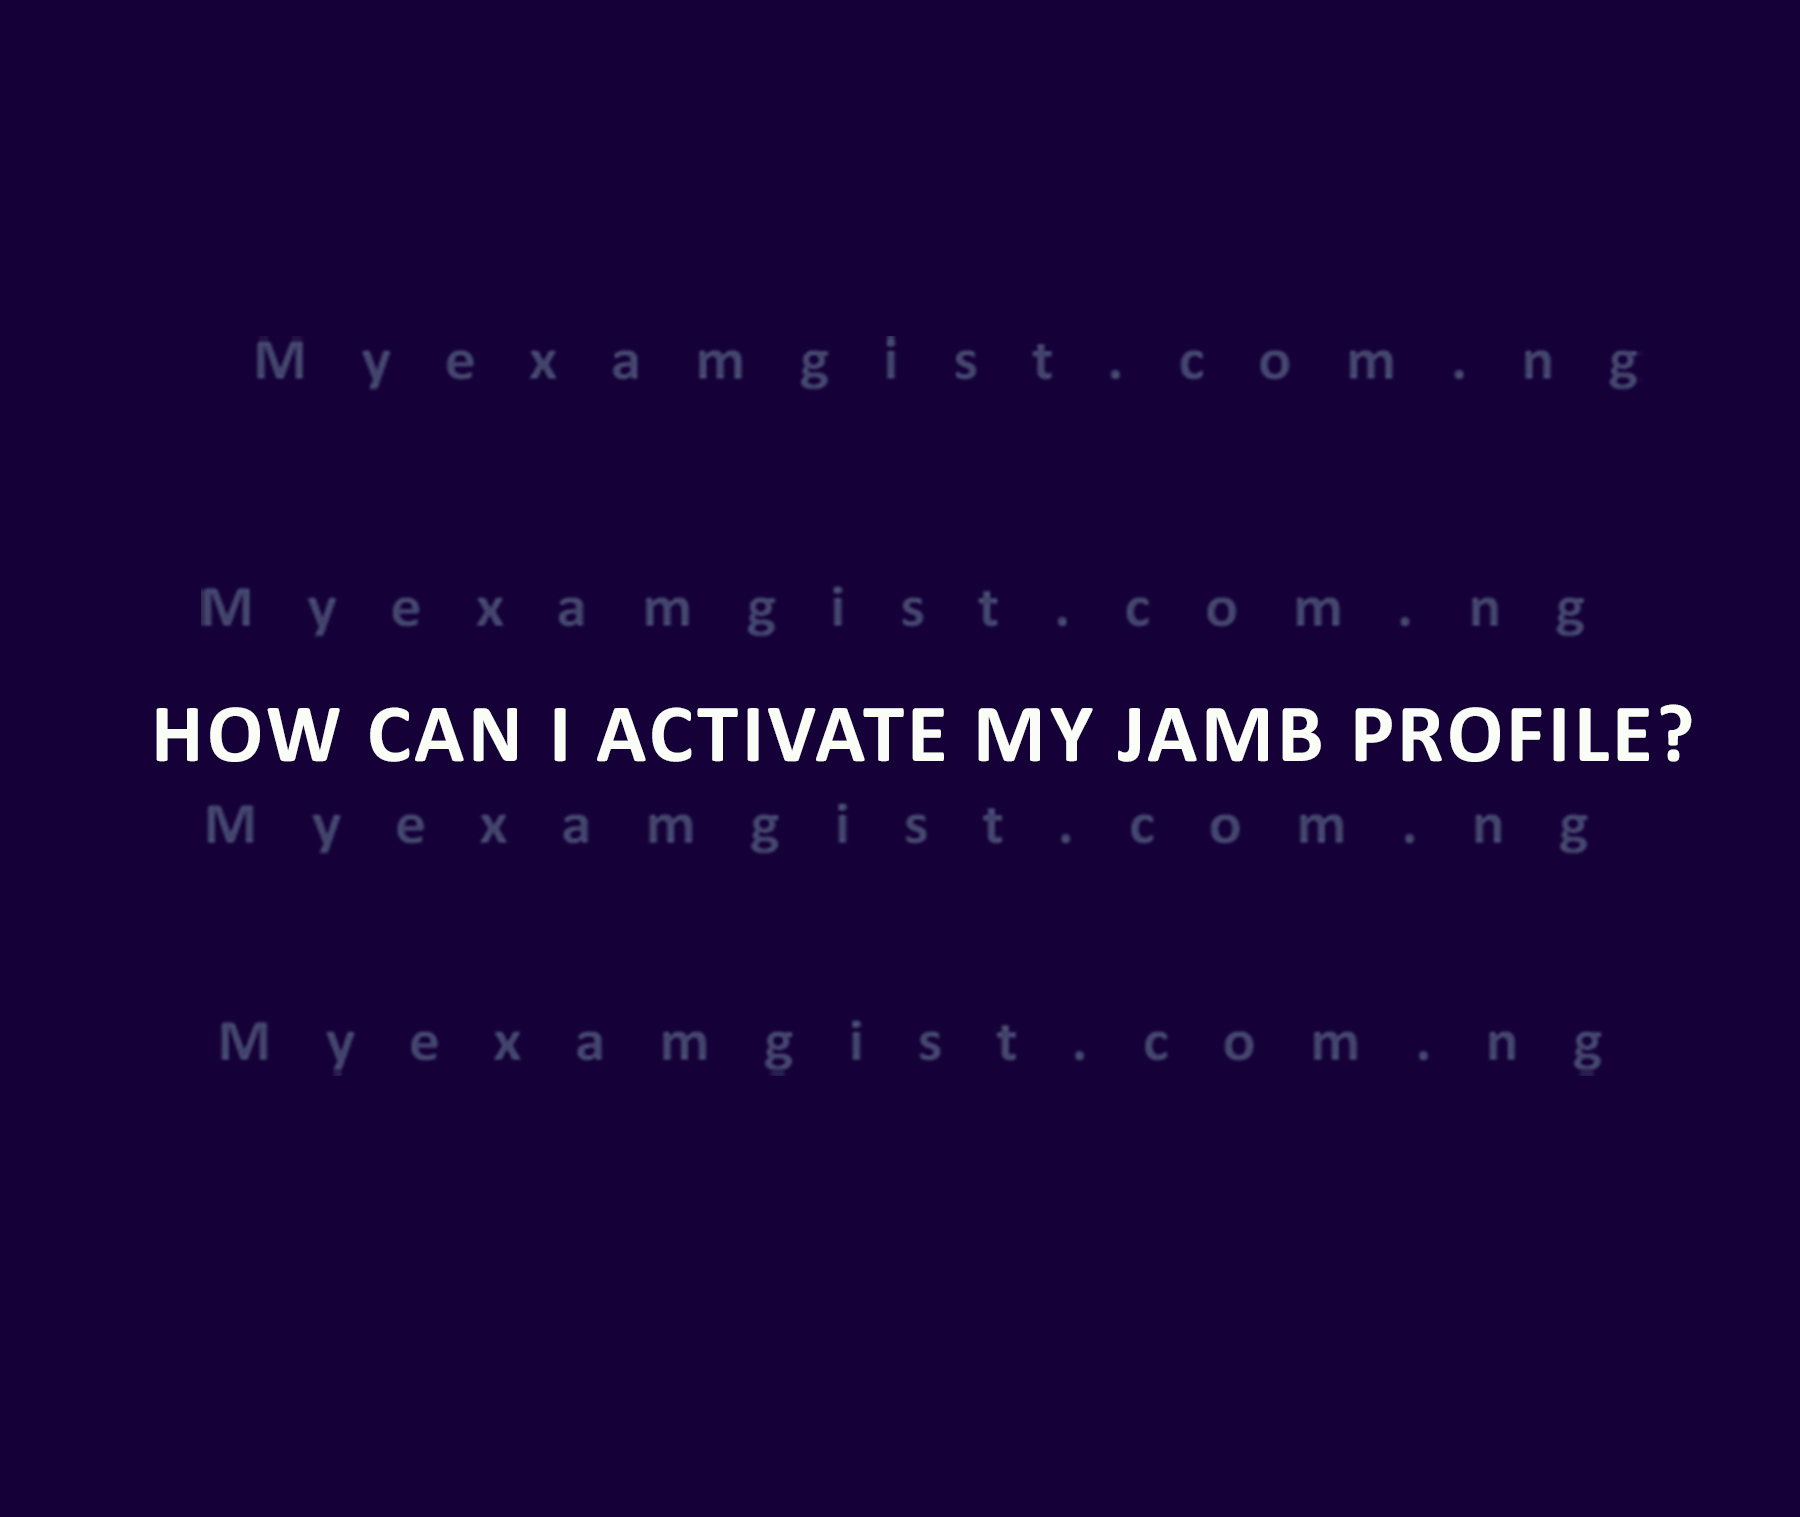 How can I activate my JAMB profile?